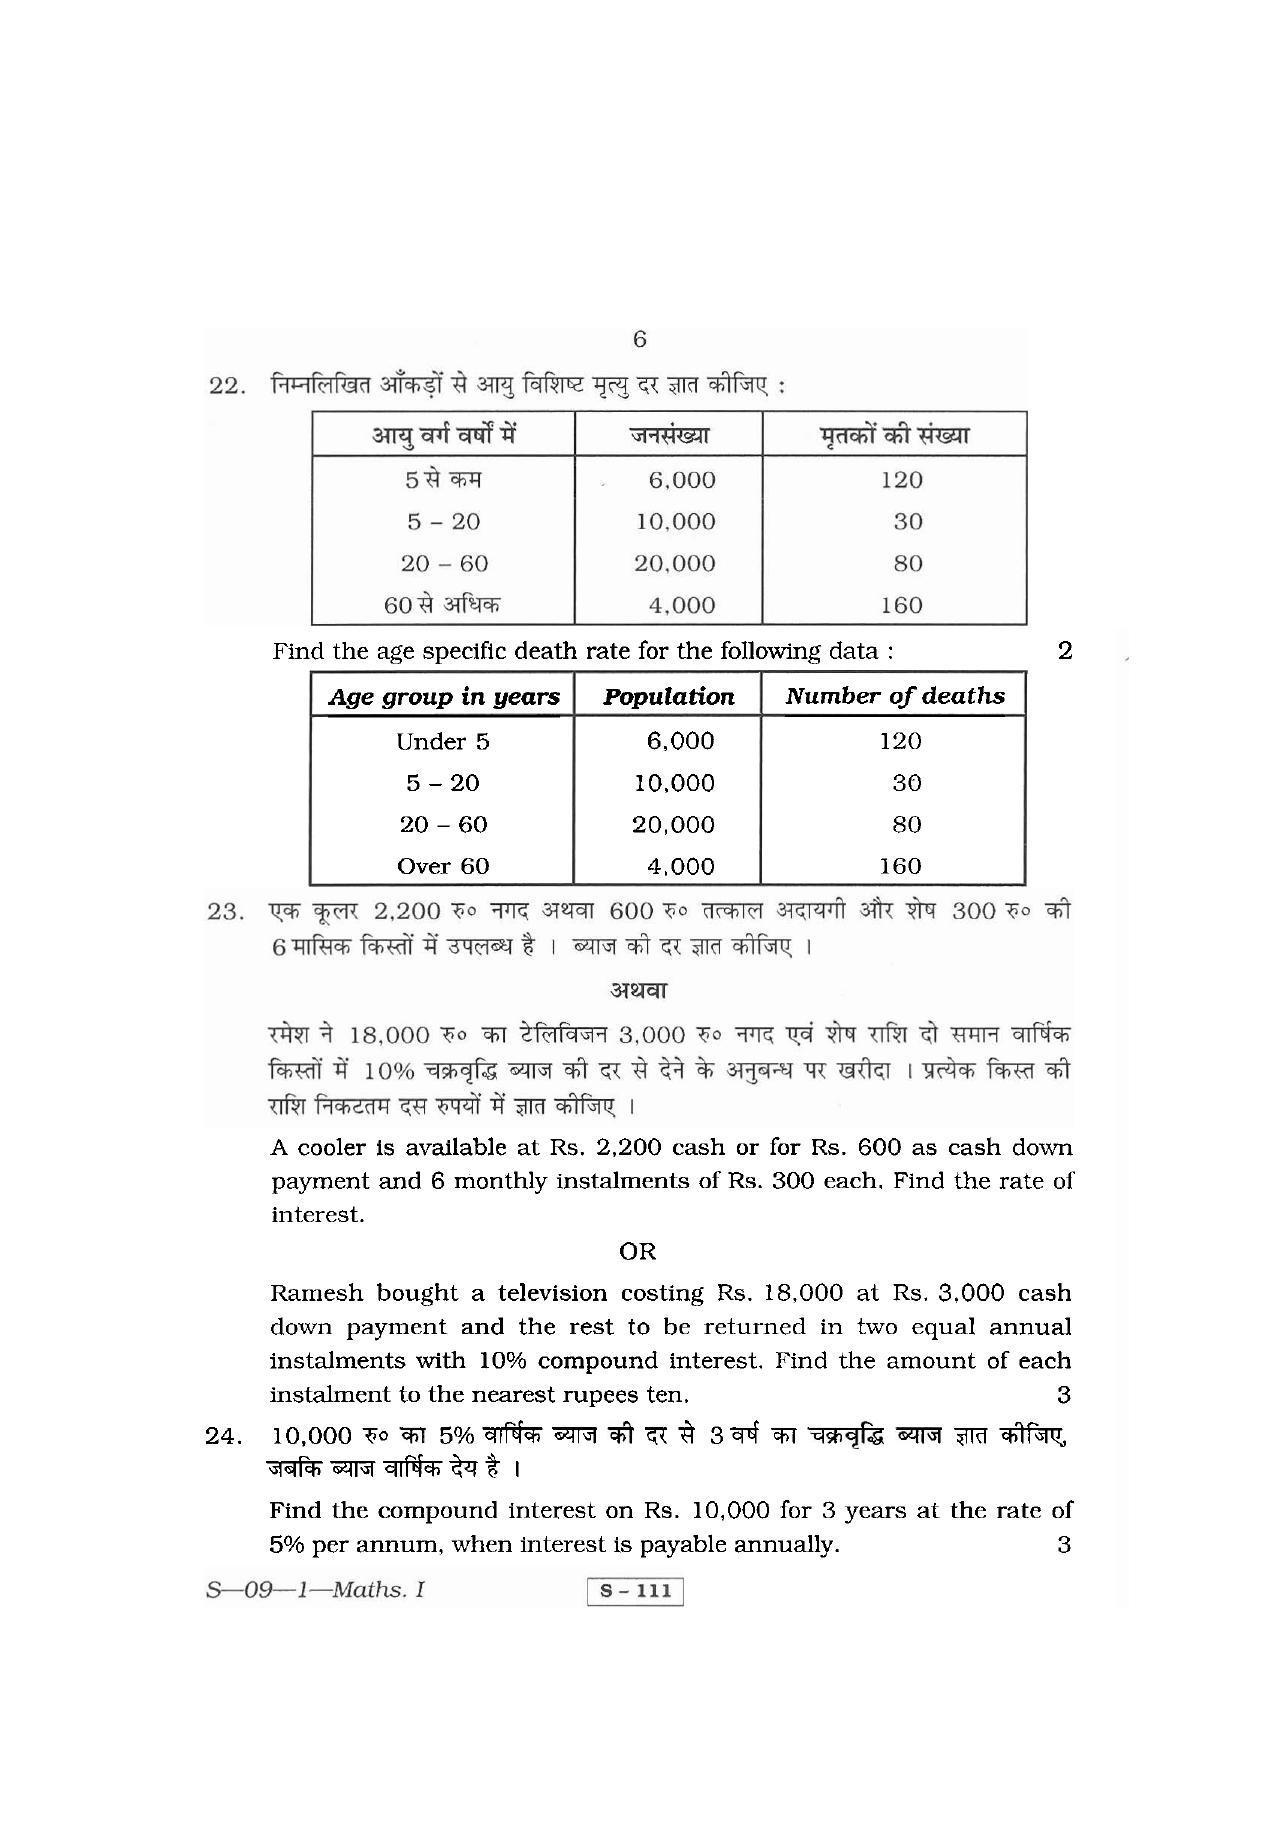 RBSE Class 10 Mathematics  – I 2011 Question Paper - Page 6